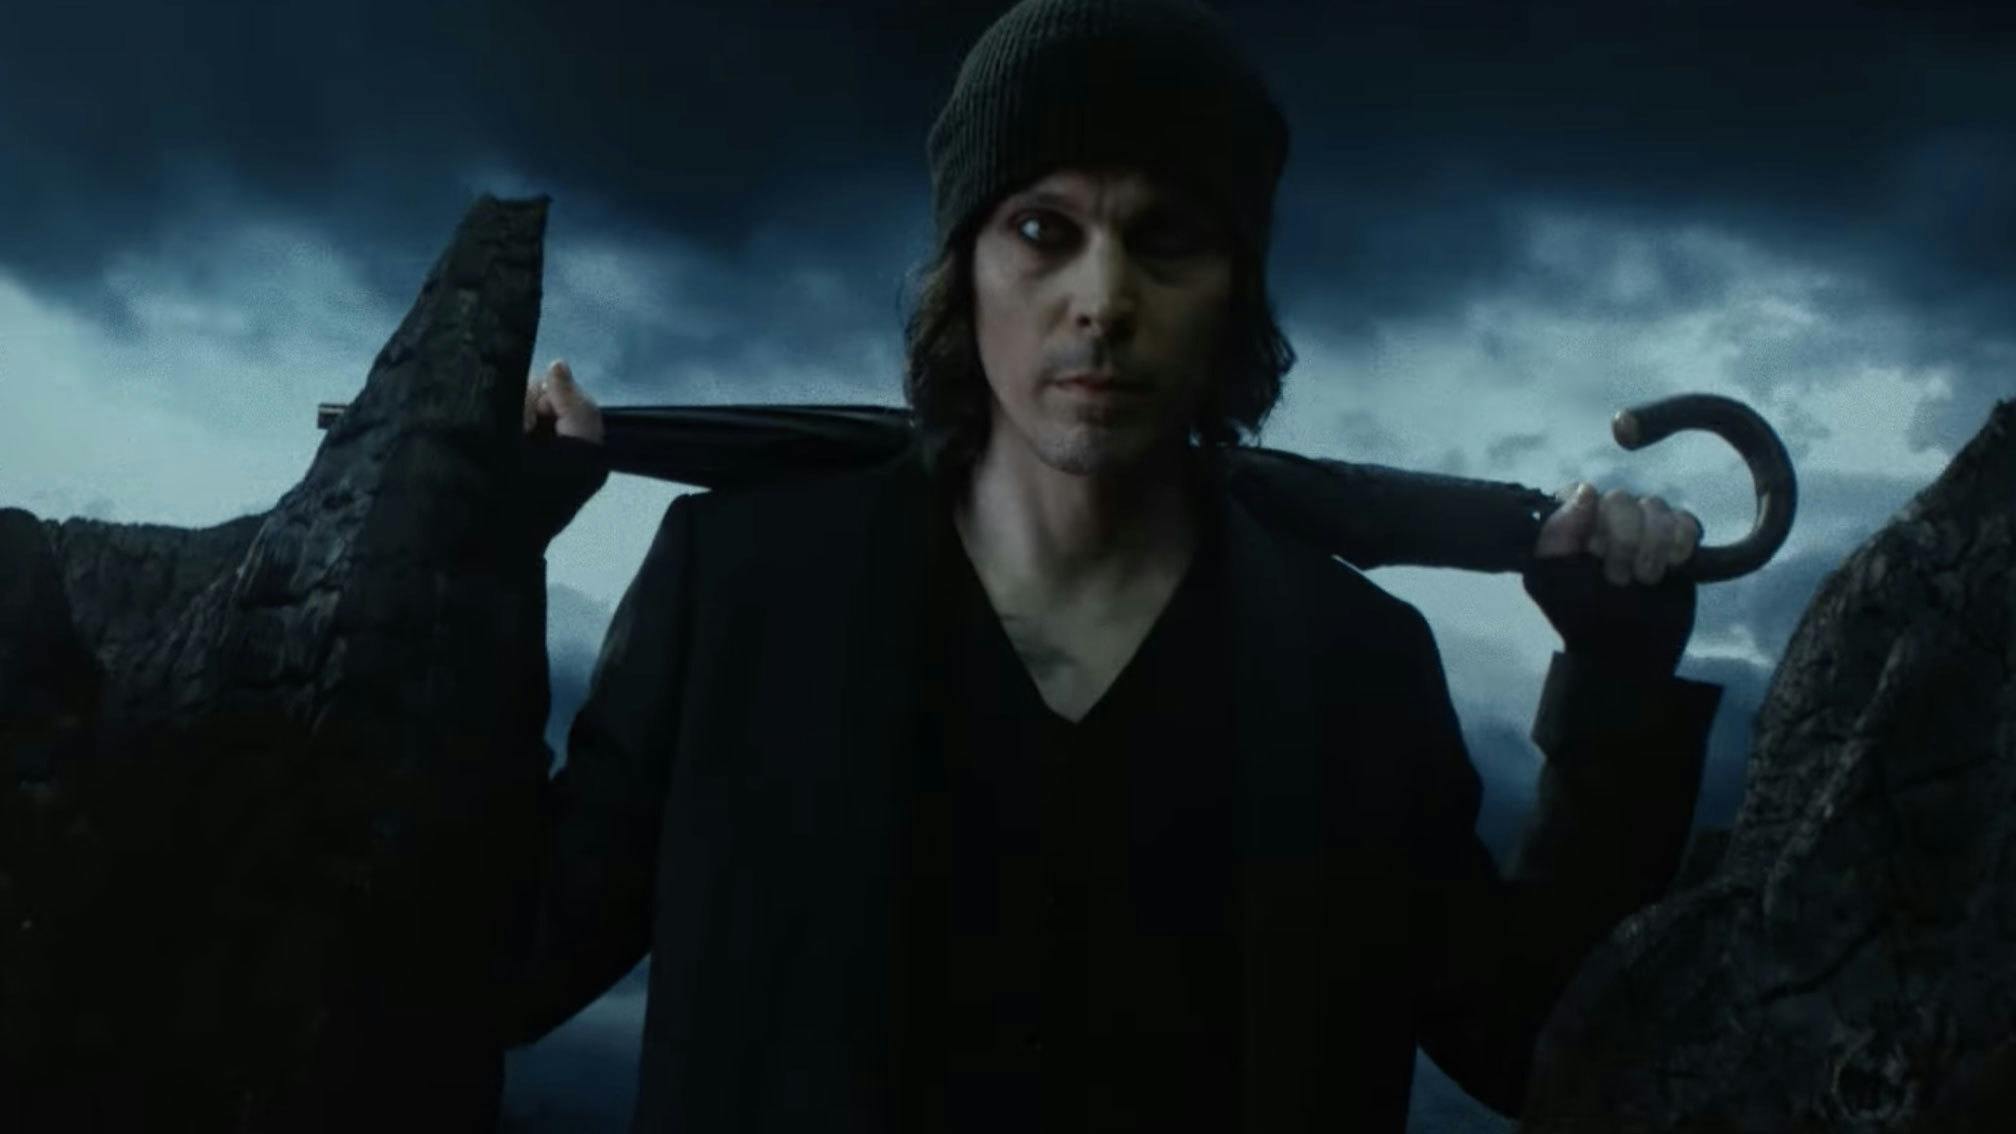 Watch the video for VV’s (Ville Valo) new single Loveletting